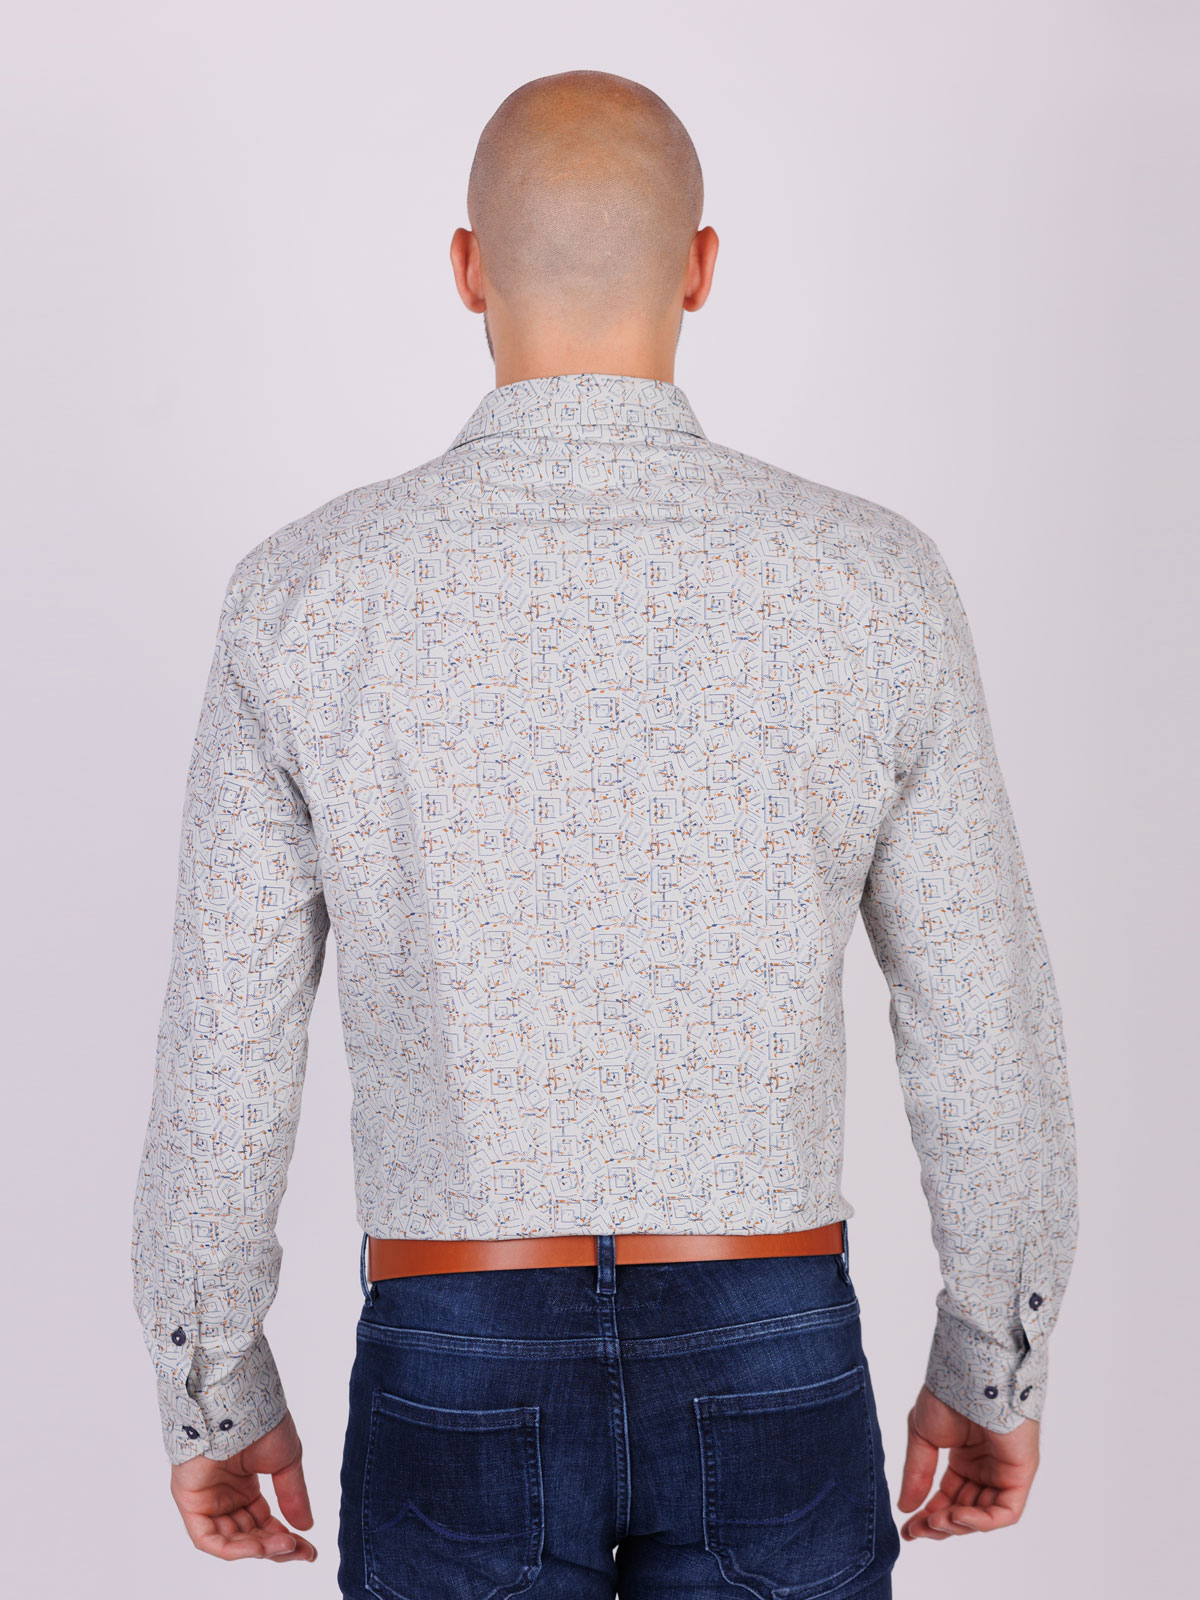 Mens shirt with a spectacular design - 21557 € 44.43 img2